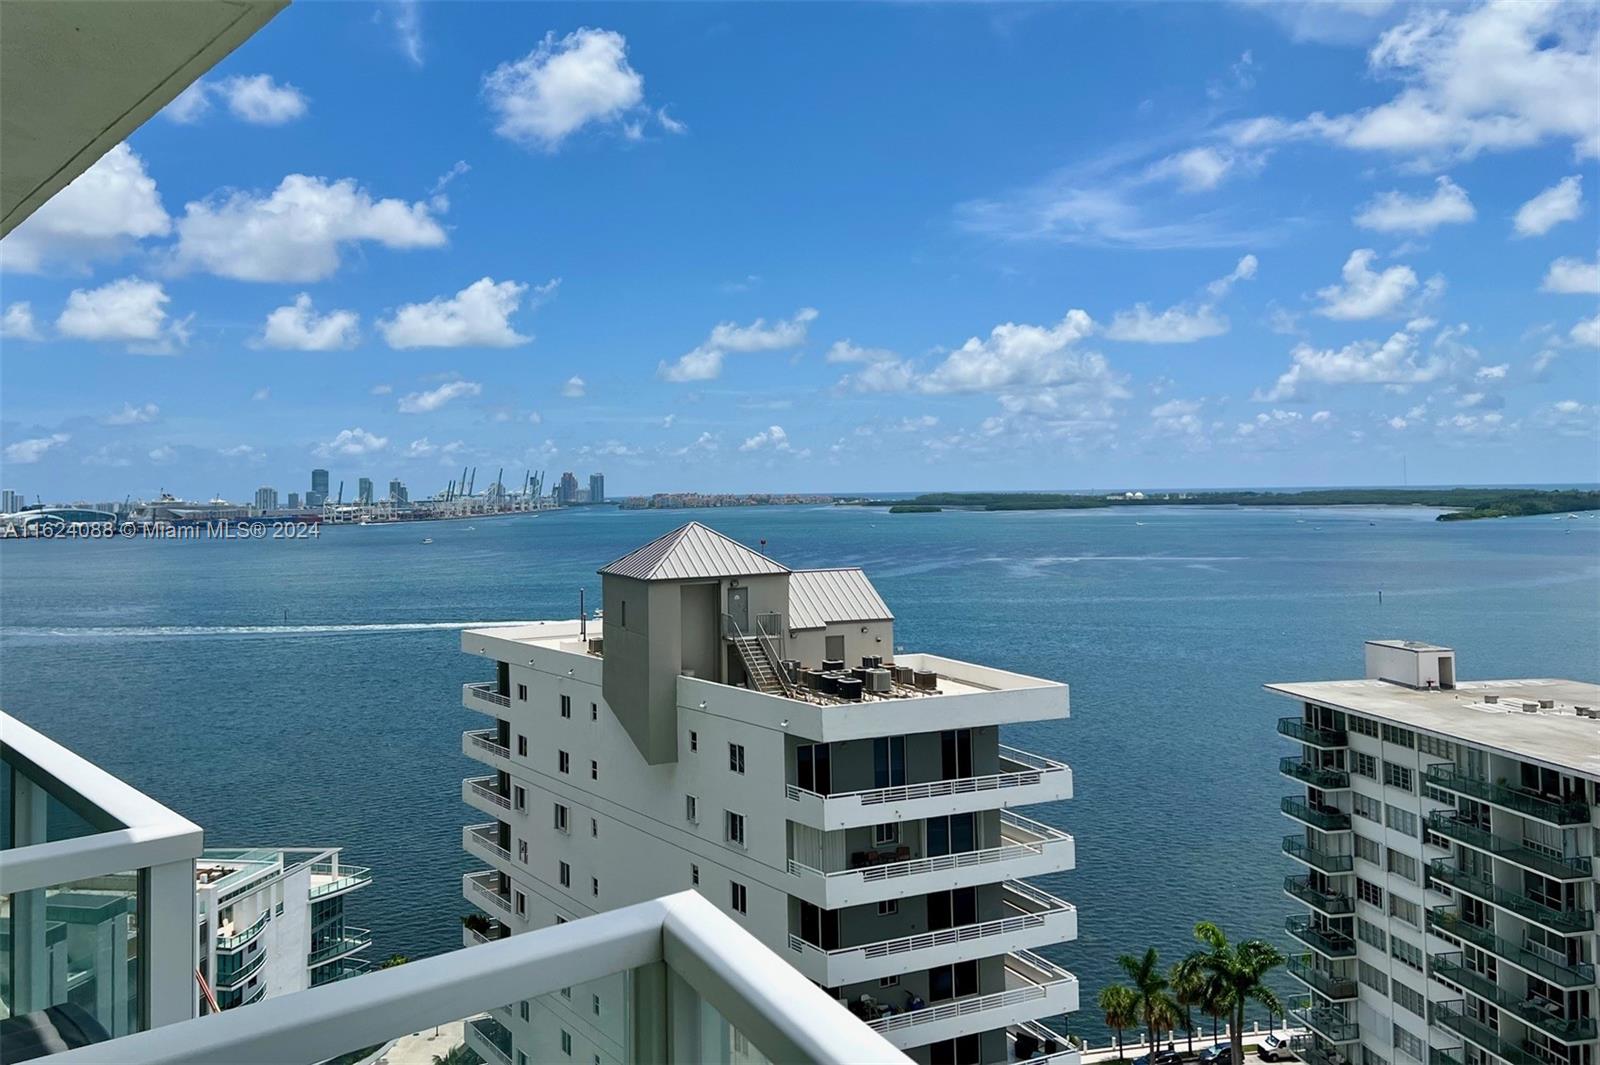 IT'S ALL ABOUT THE VIEW! Unique 1bed/1bath unit in the prestigious Emerald at Brickell. Incredible panoramic view of Biscayne Bay from a 19th floor unit in boutique building. High ceilings, quartz flooring, Scavolini kitchen with top-of-the-line stainless steel appliances and Subzero fridge, marble floors, spacious bedroom, and bathroom with jacuzzi. Storage room. Community offers rooftop pool and gymnasium, deck with amazing city views, valet parking, and 24-hour security.